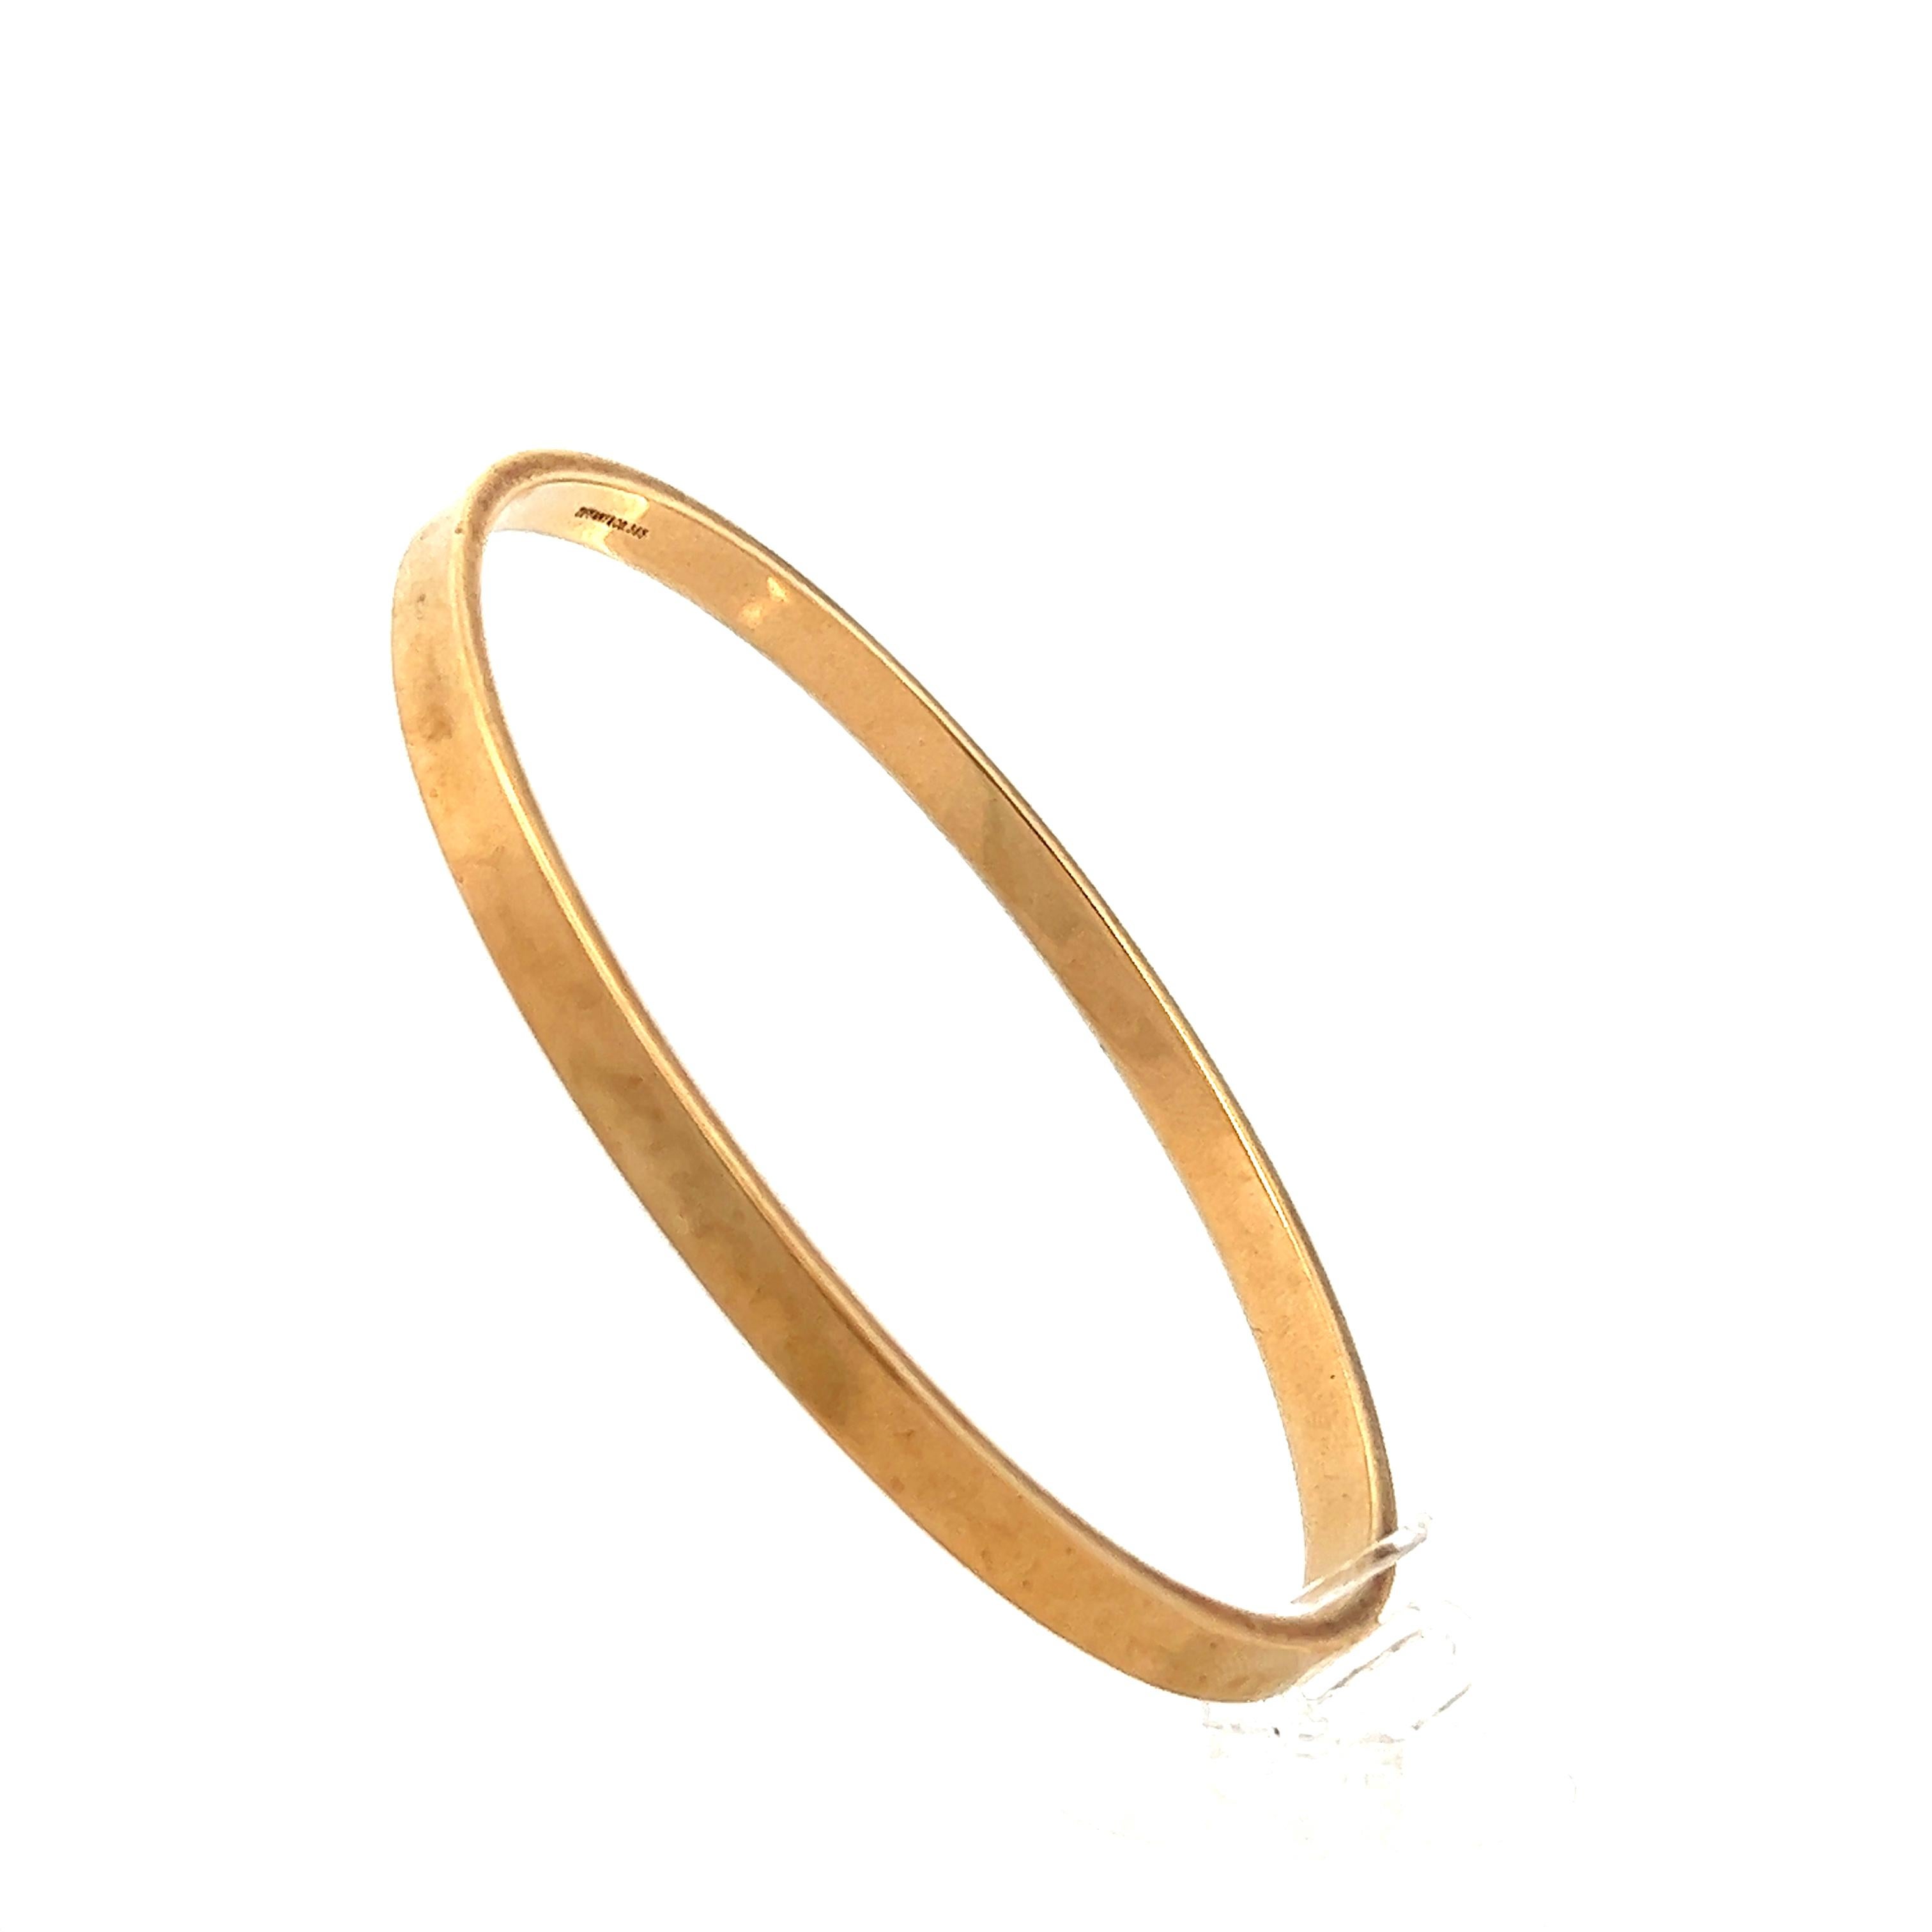 This vintage Tiffany & Co. 14 Karat Yellow Gold Bangle Bracelet is crafted in beautifully detailed 14K polished yellow gold. The bracelet features a traditional slip on bangle design and features no locks or clasps. The inside of the bracelet it